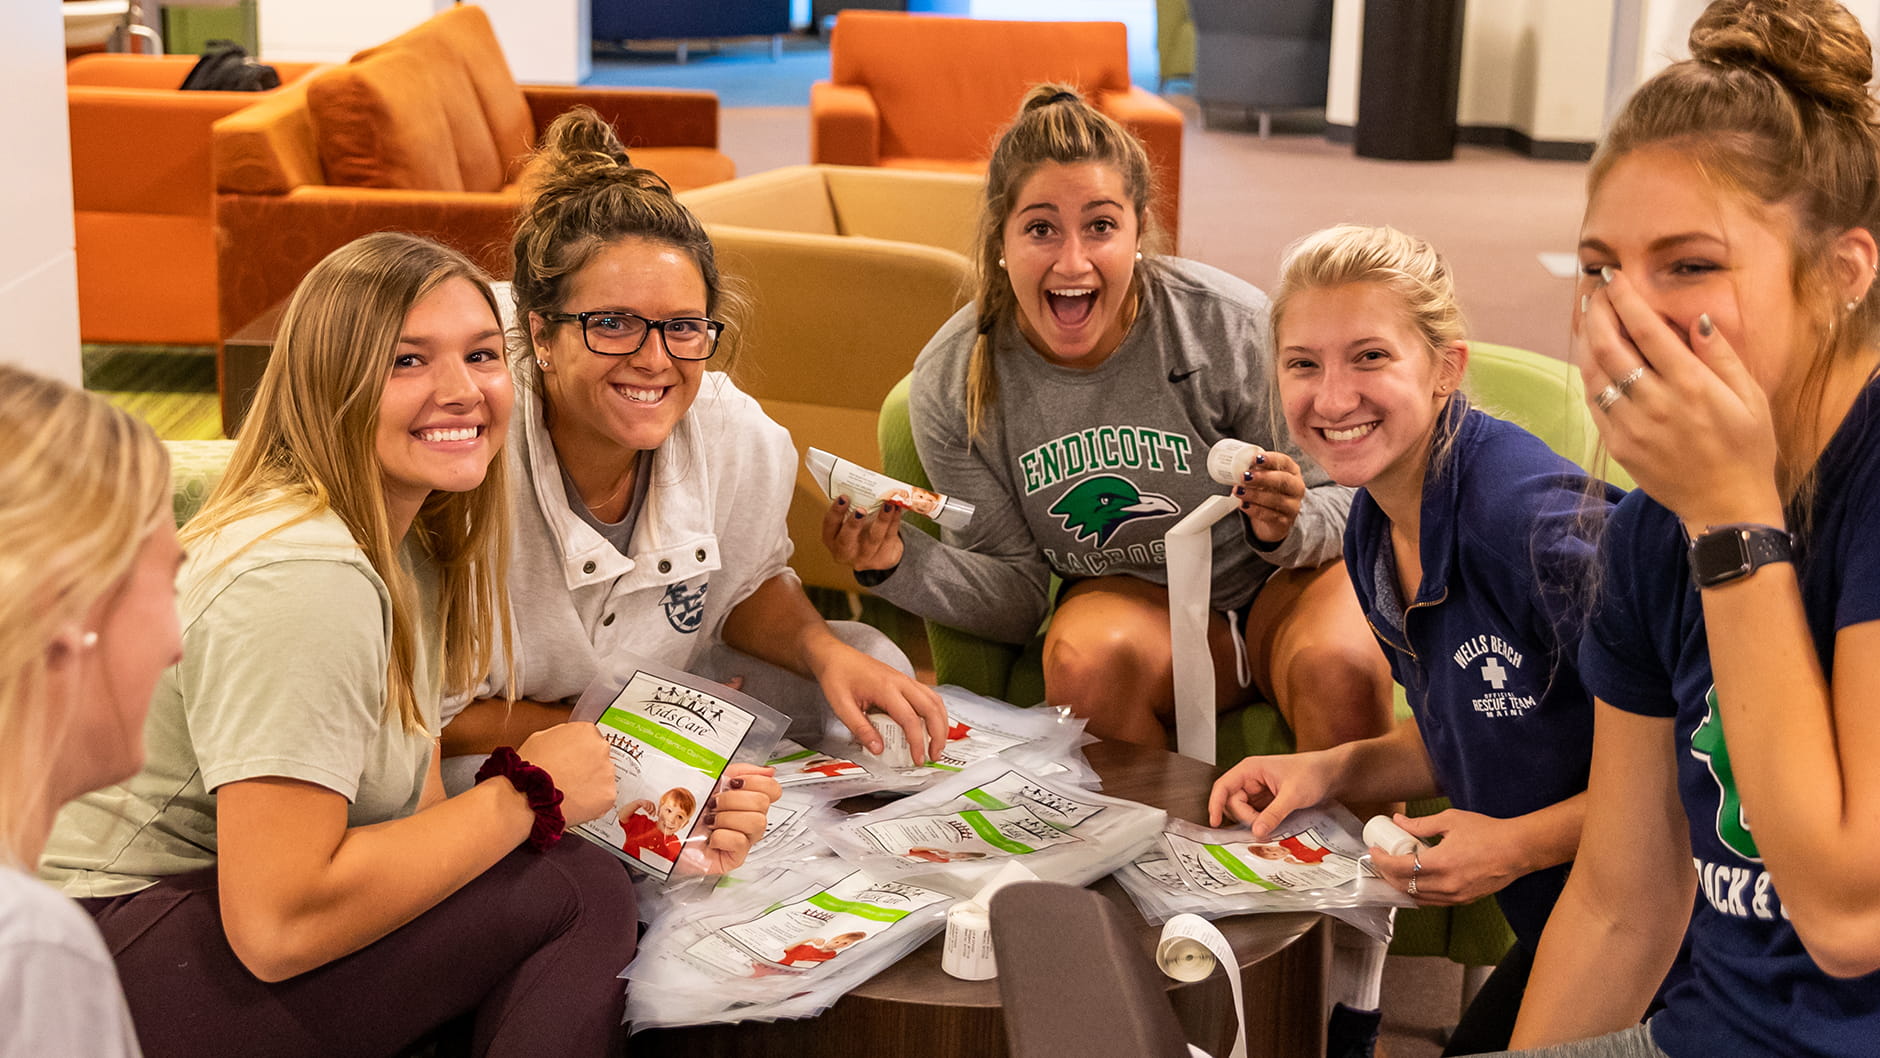 Make a Difference by Giving Back at Endicott College